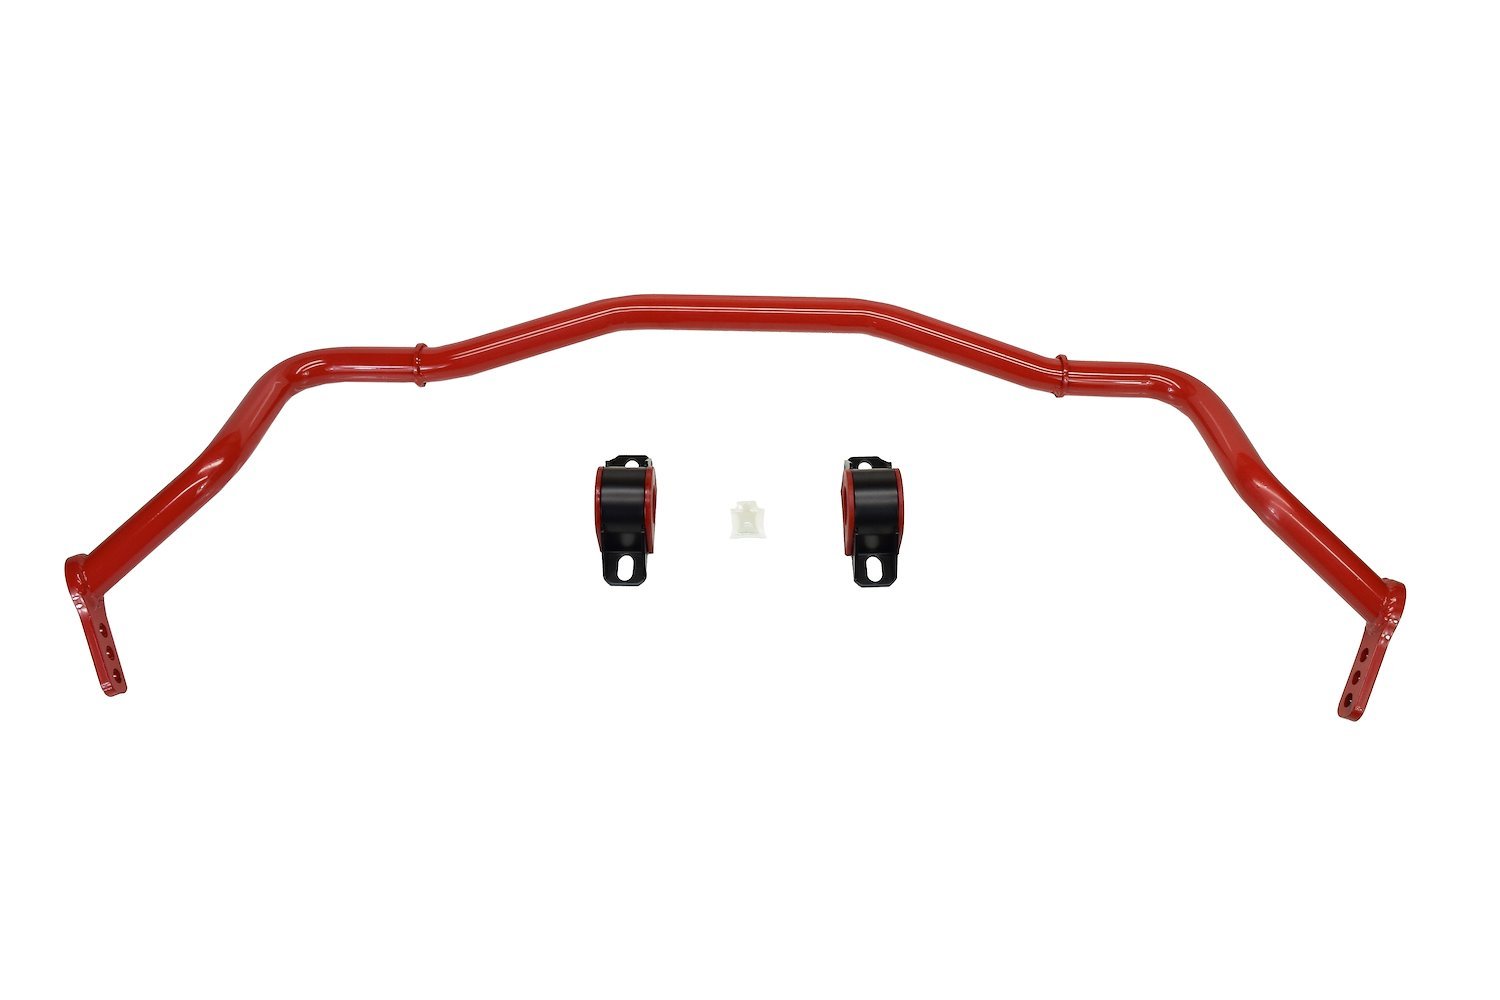 PED-428024-35 Sway Bar, Front, Mustang S550, 35 mm Adj 3-Hole Tubular